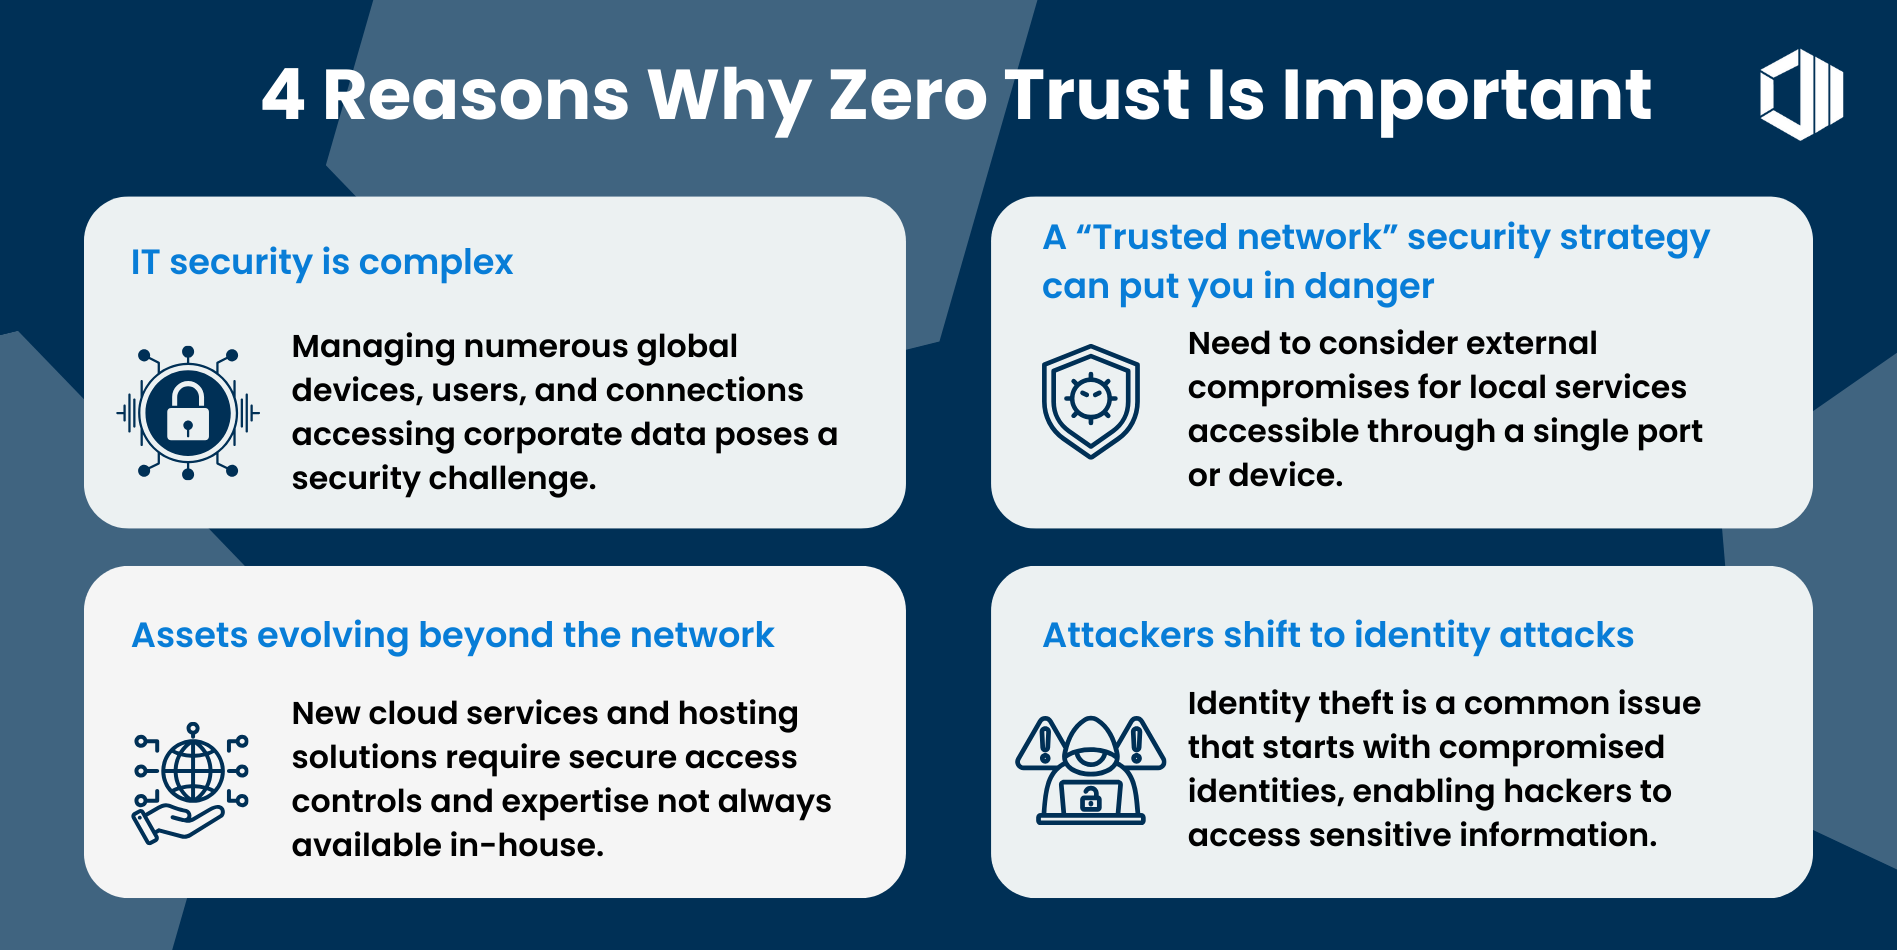 4 Reasons Why Zero Trust Is Important infographic. 